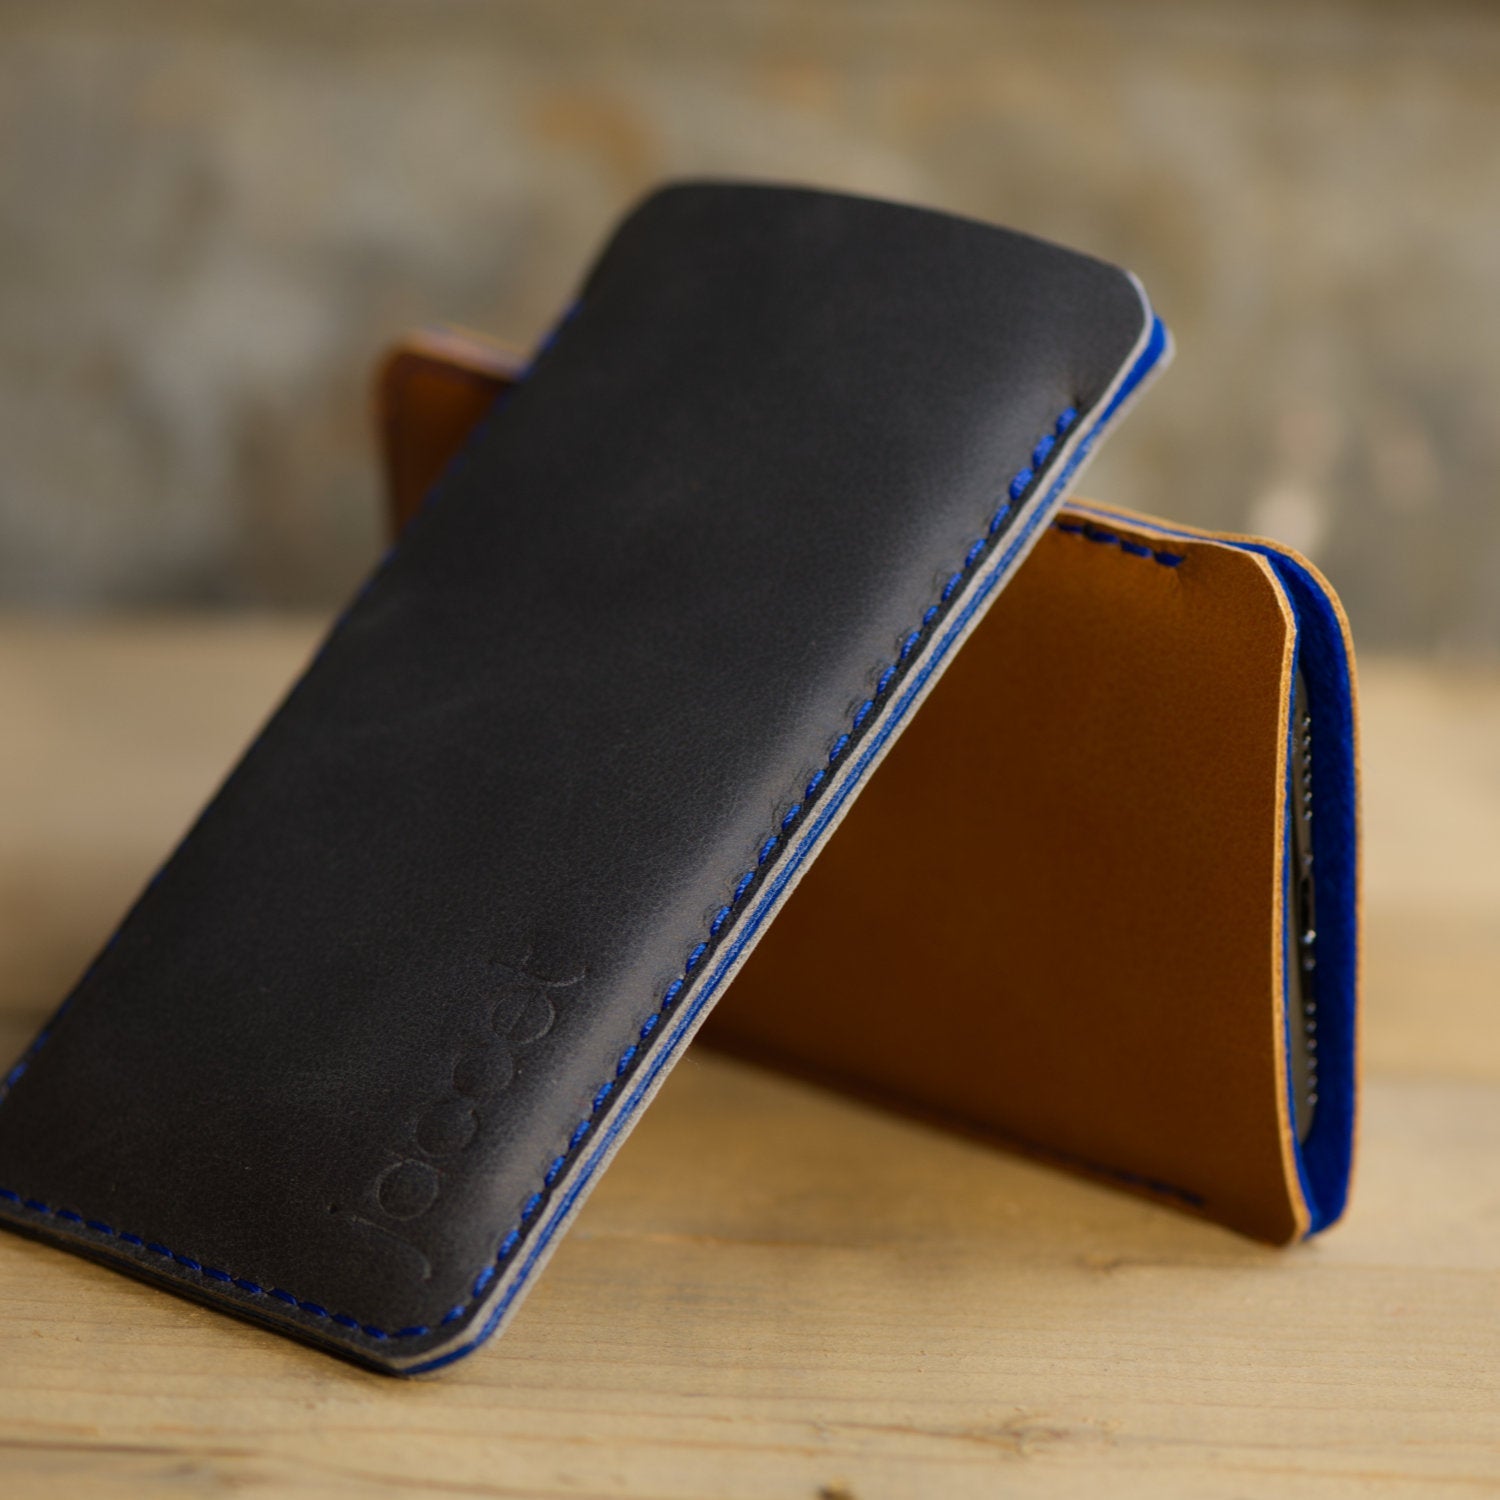 JACCET leather Samsung Galaxy sleeve - anthracite/black leather with blue wool felt. 100% Handmade